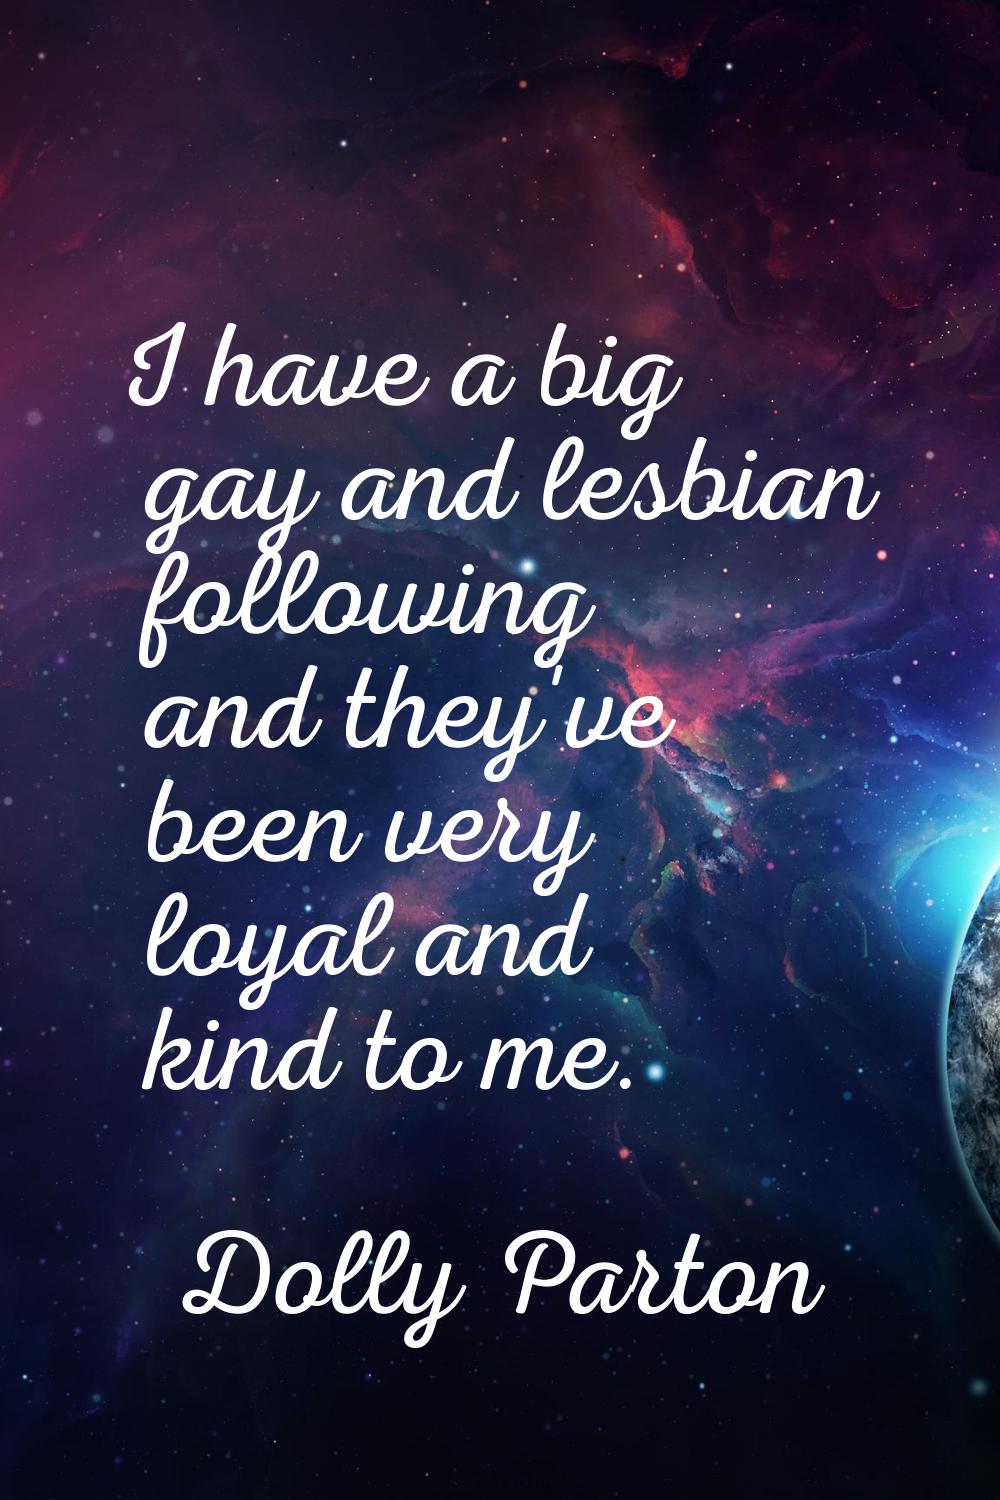 I have a big gay and lesbian following and they've been very loyal and kind to me.